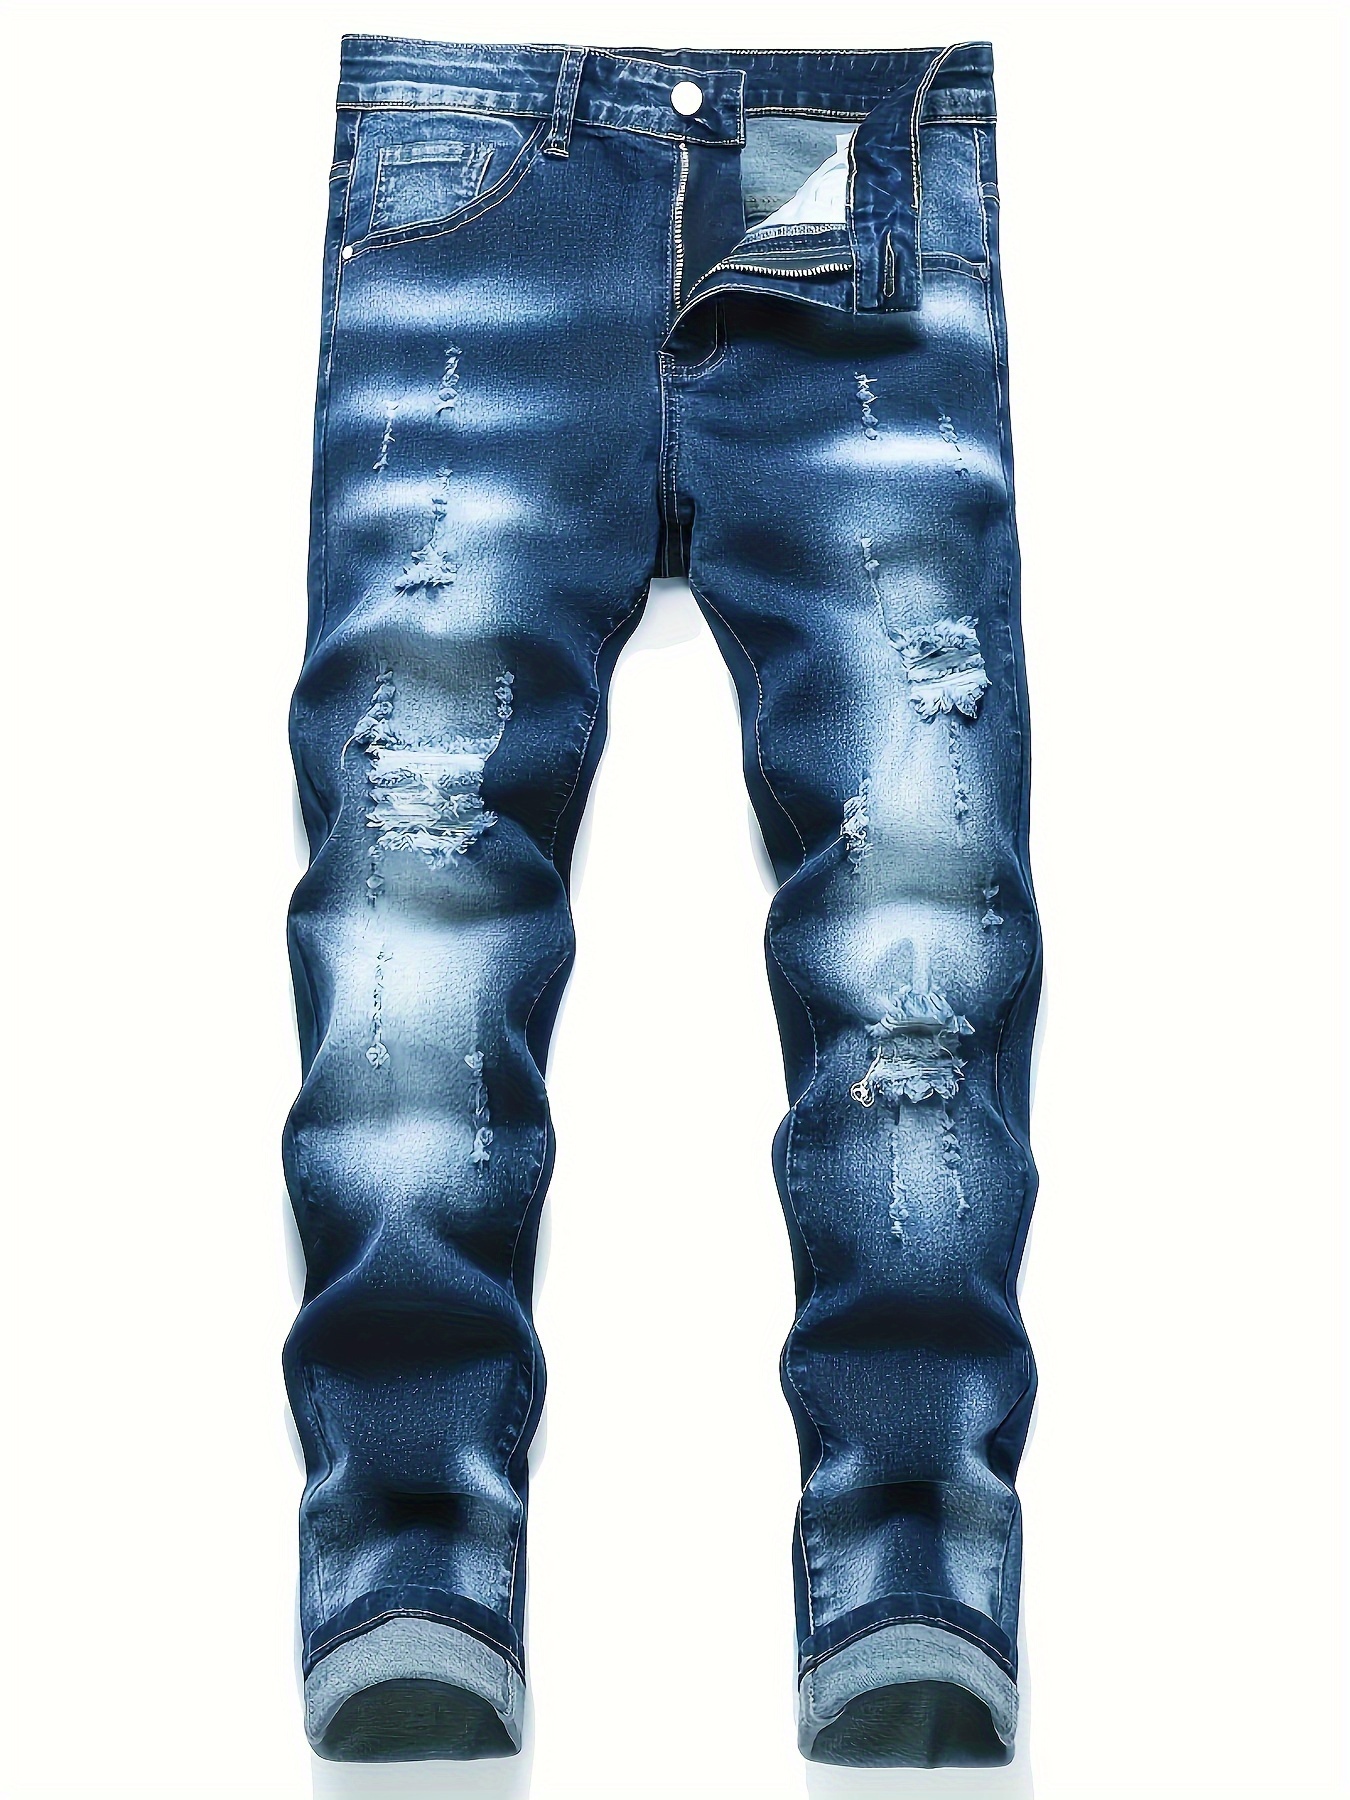 MOKEWEN Men's Shredded Destroyed Chain Jeans ($56) ❤ liked on Polyvore  featuring men's fashion, men's clot…